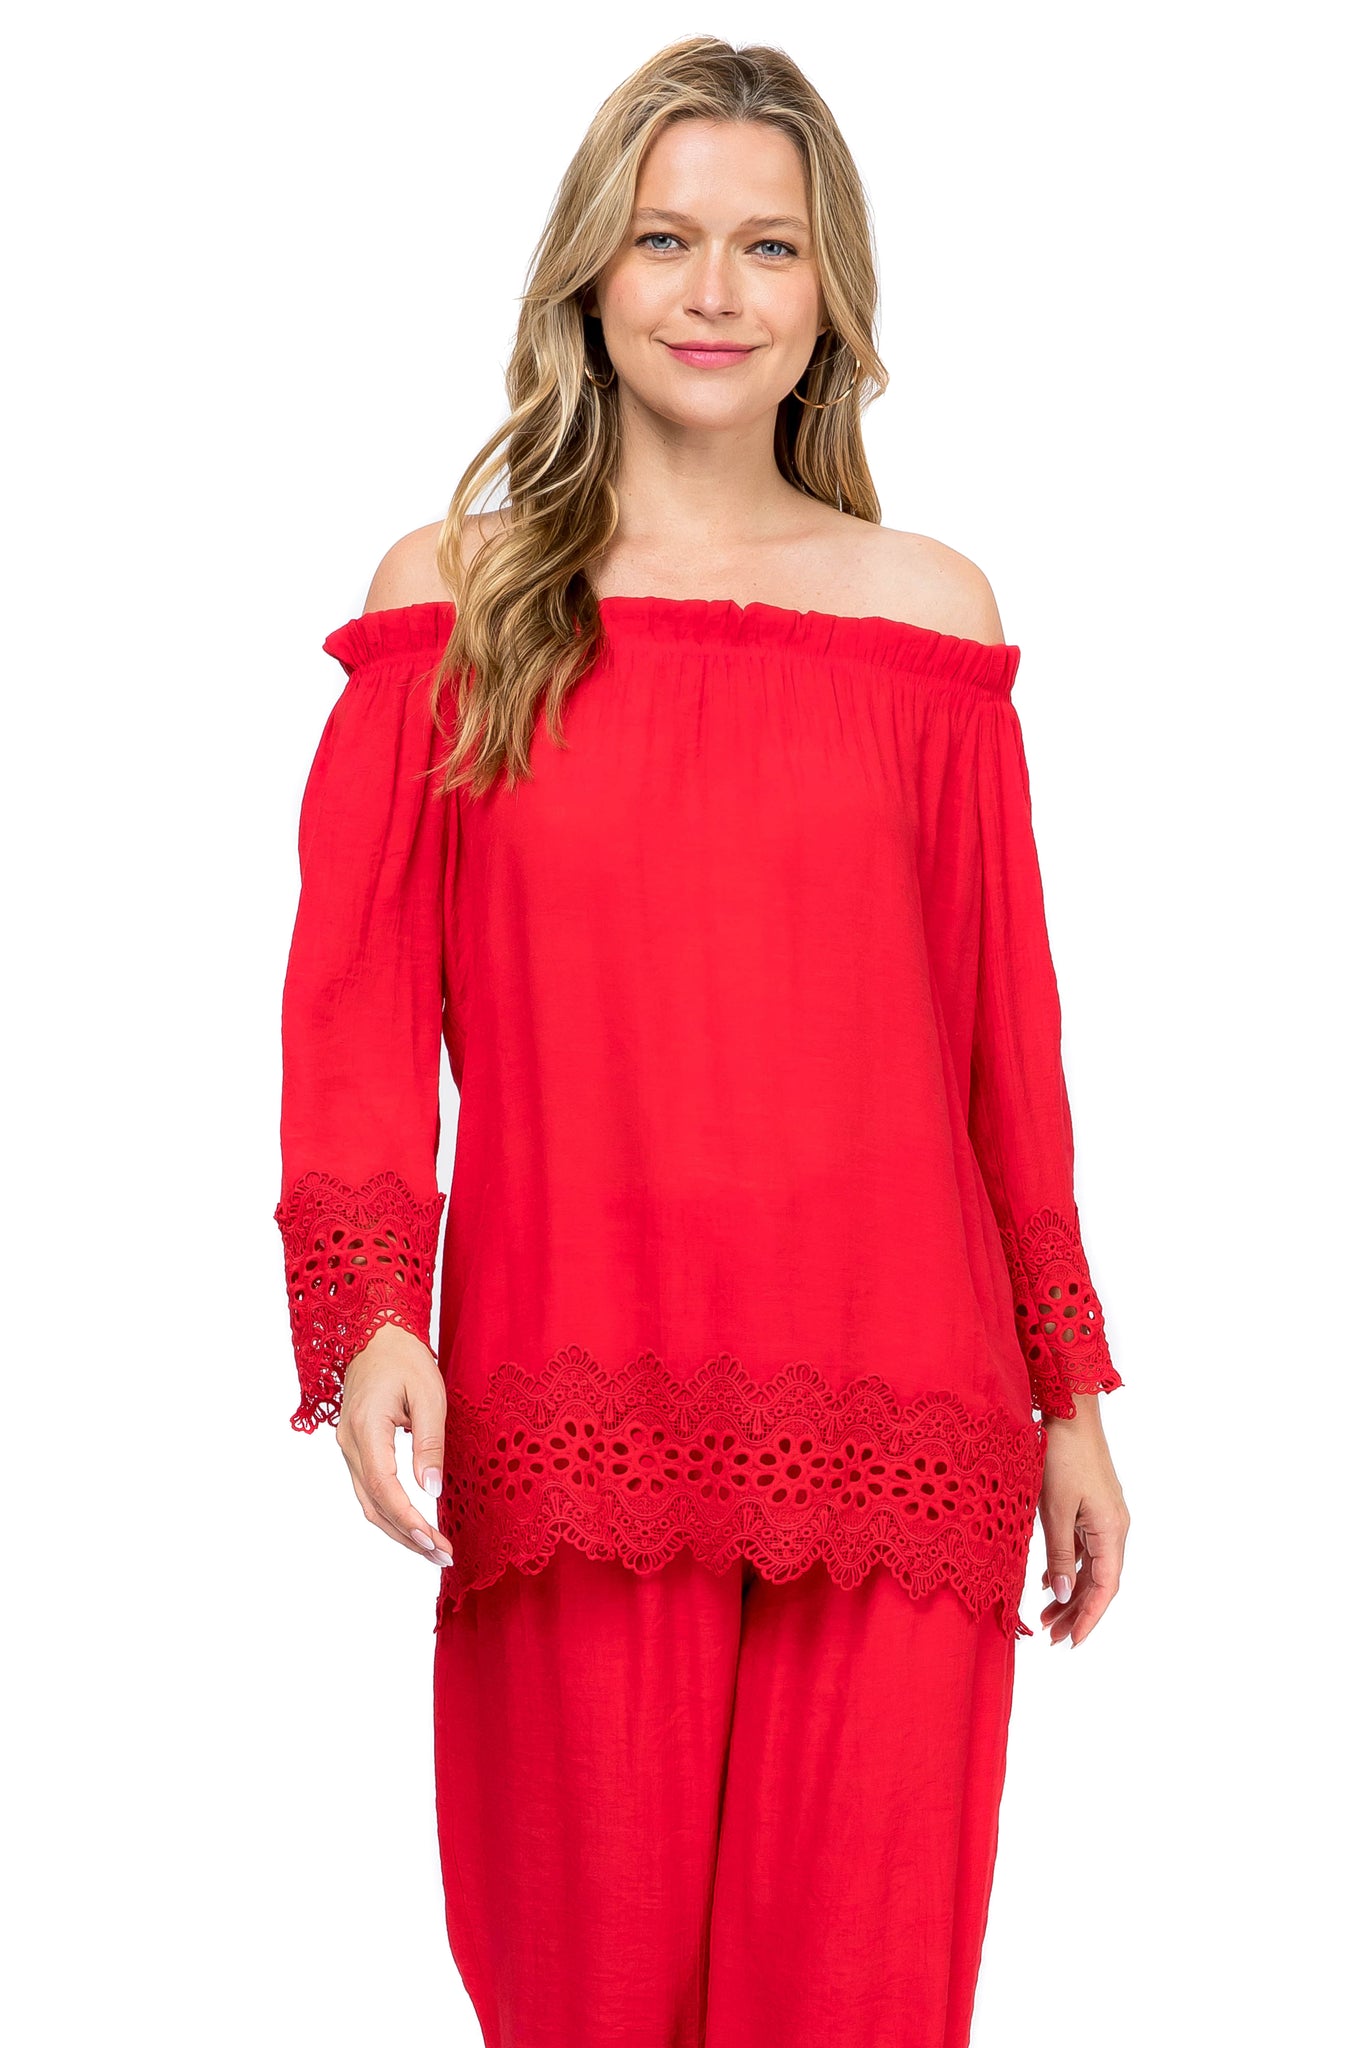 Women's Casual Off-Shoulder Crochet Trimmed Hem and Sleeve Tunic Top - Mojito Collection - Vacation Clothing, Women's Clothing, Women's Resort Wear, Women's Top